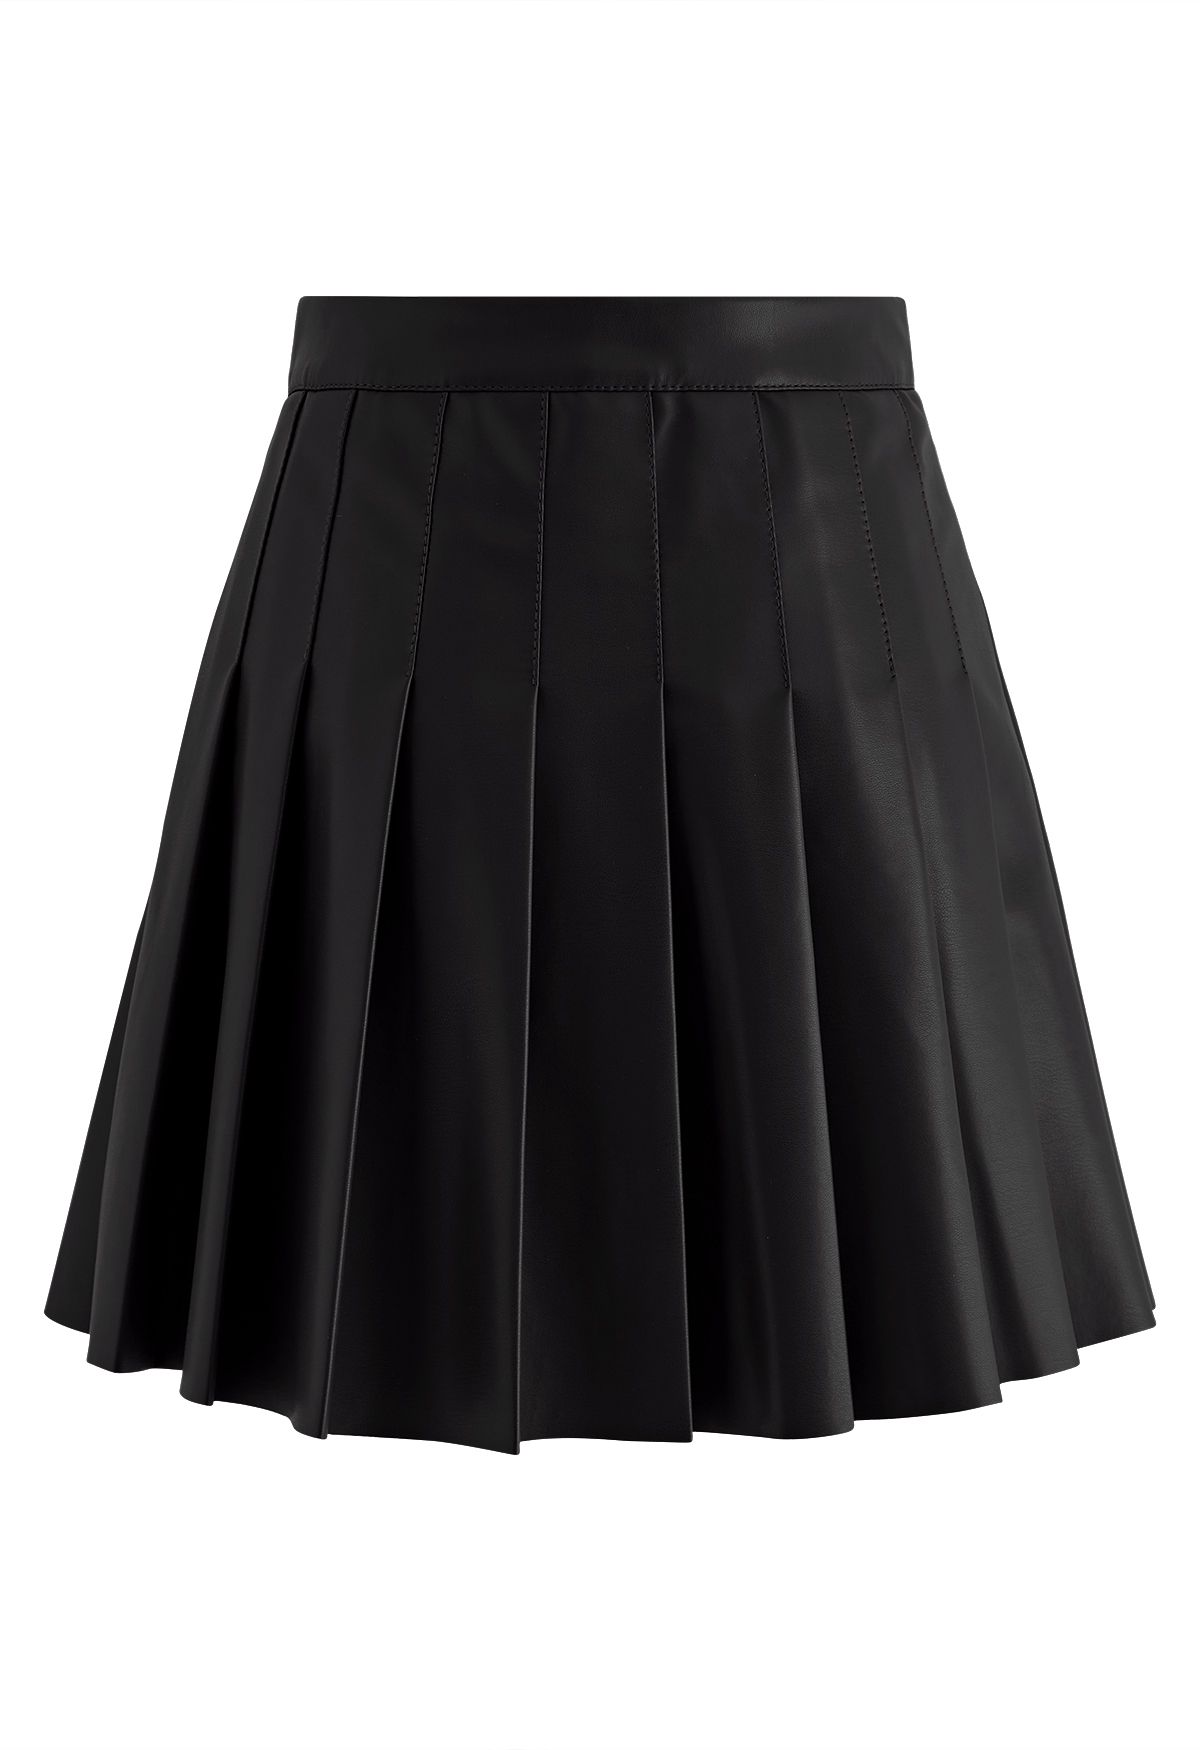 Faux Leather Pleated Flare Mini Skirt in Black - Retro, Indie and